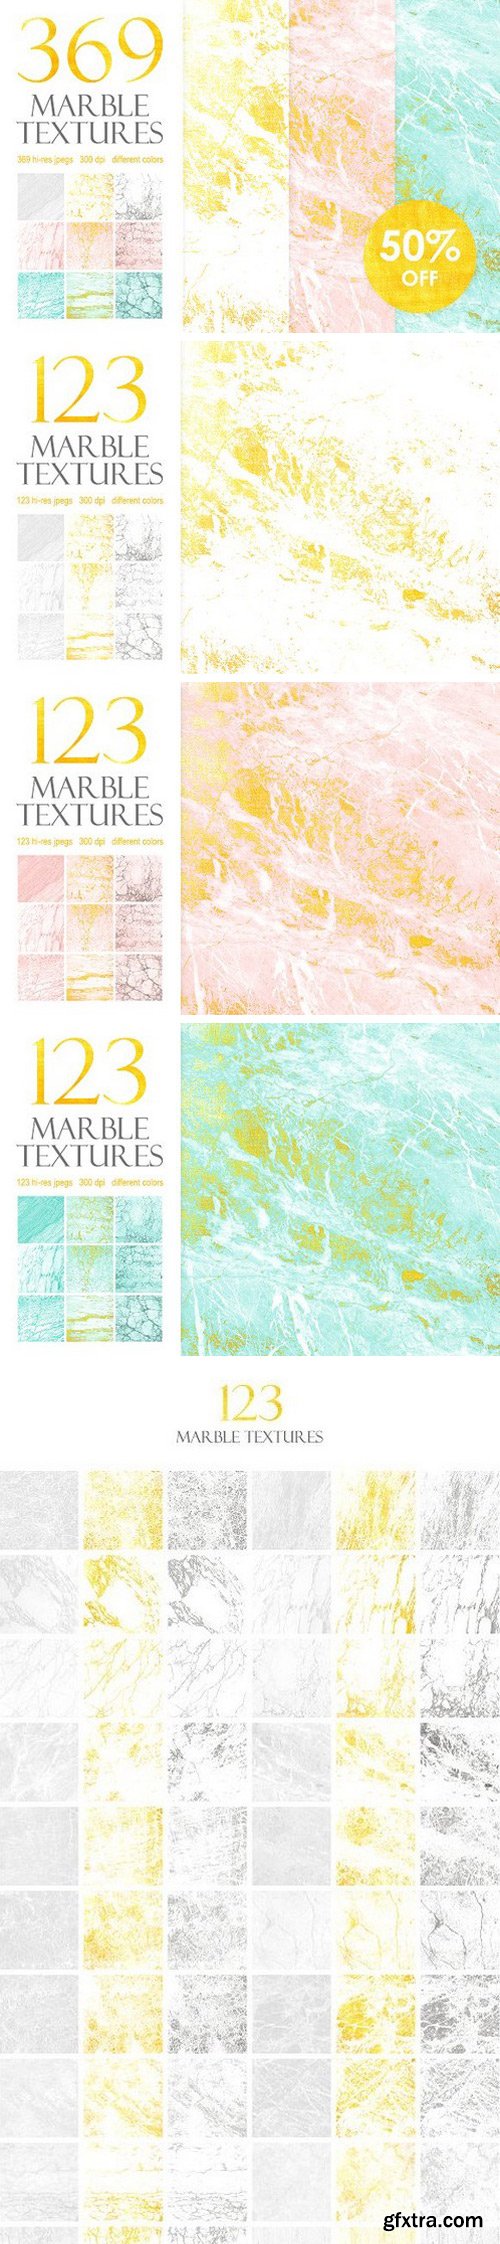 369 Marble Textures